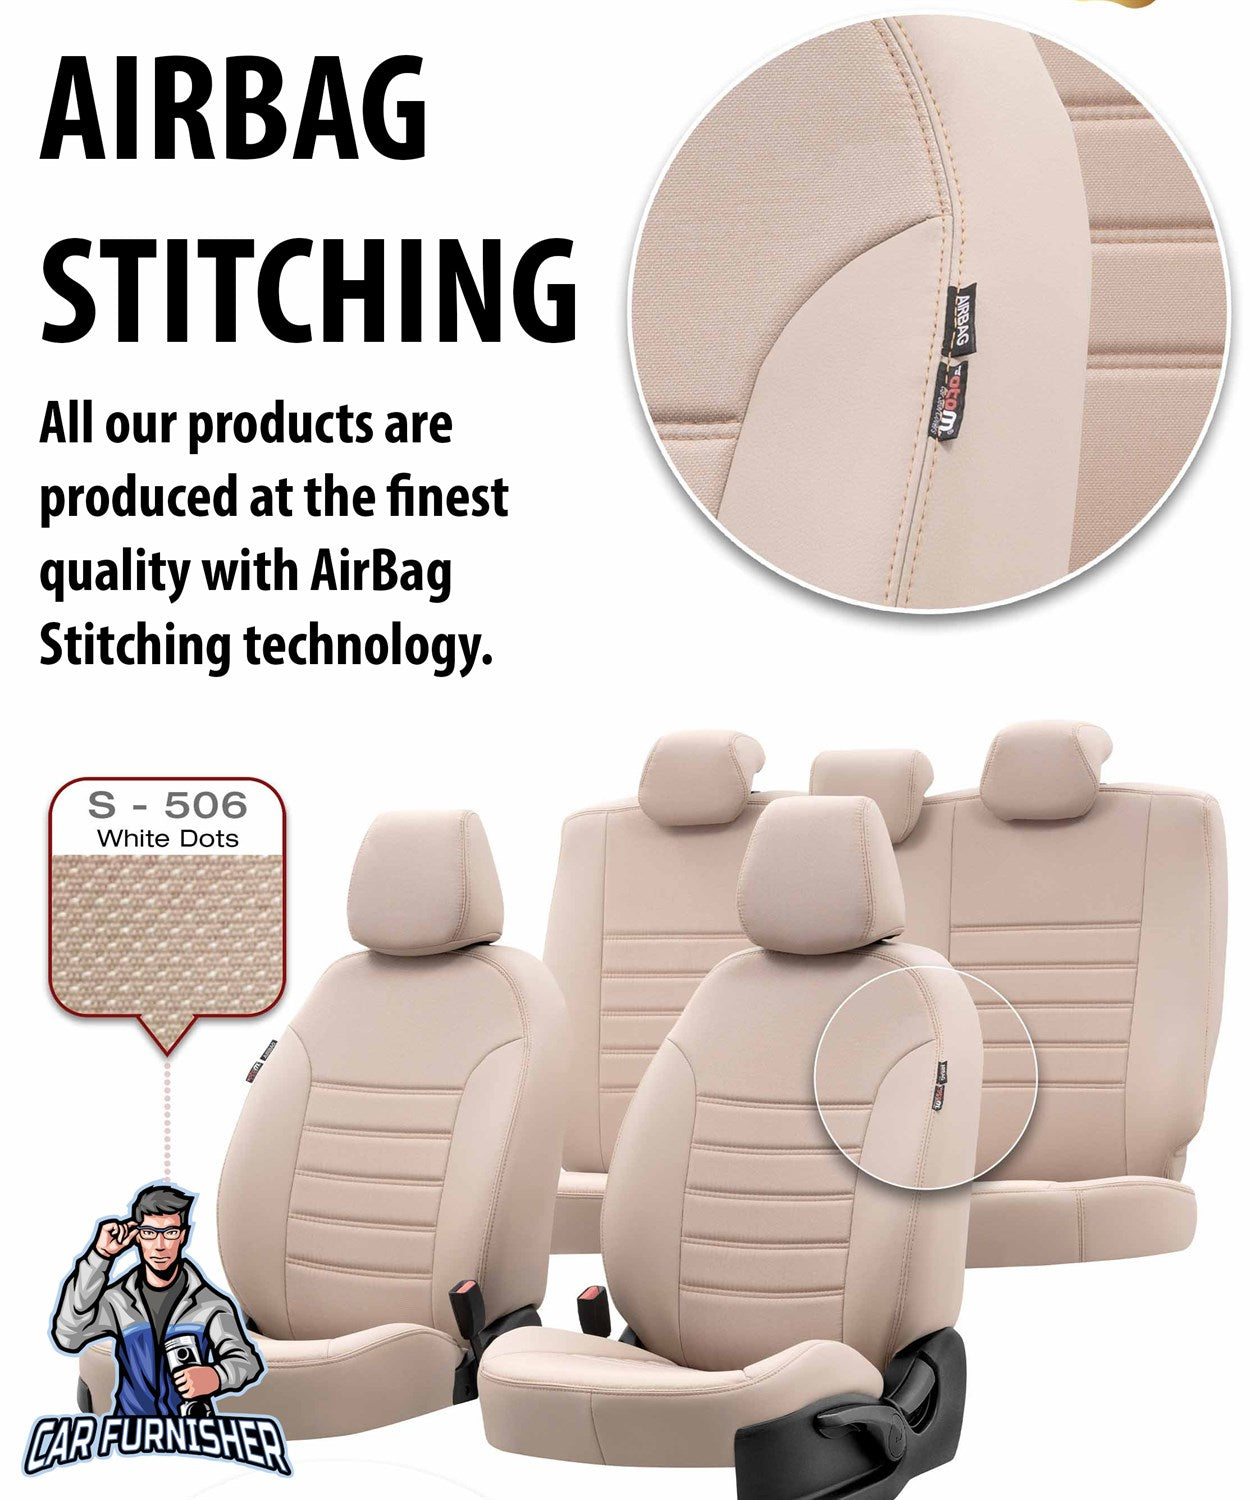 Ford Connect Seat Covers Paris Leather & Jacquard Design Black Leather & Jacquard Fabric